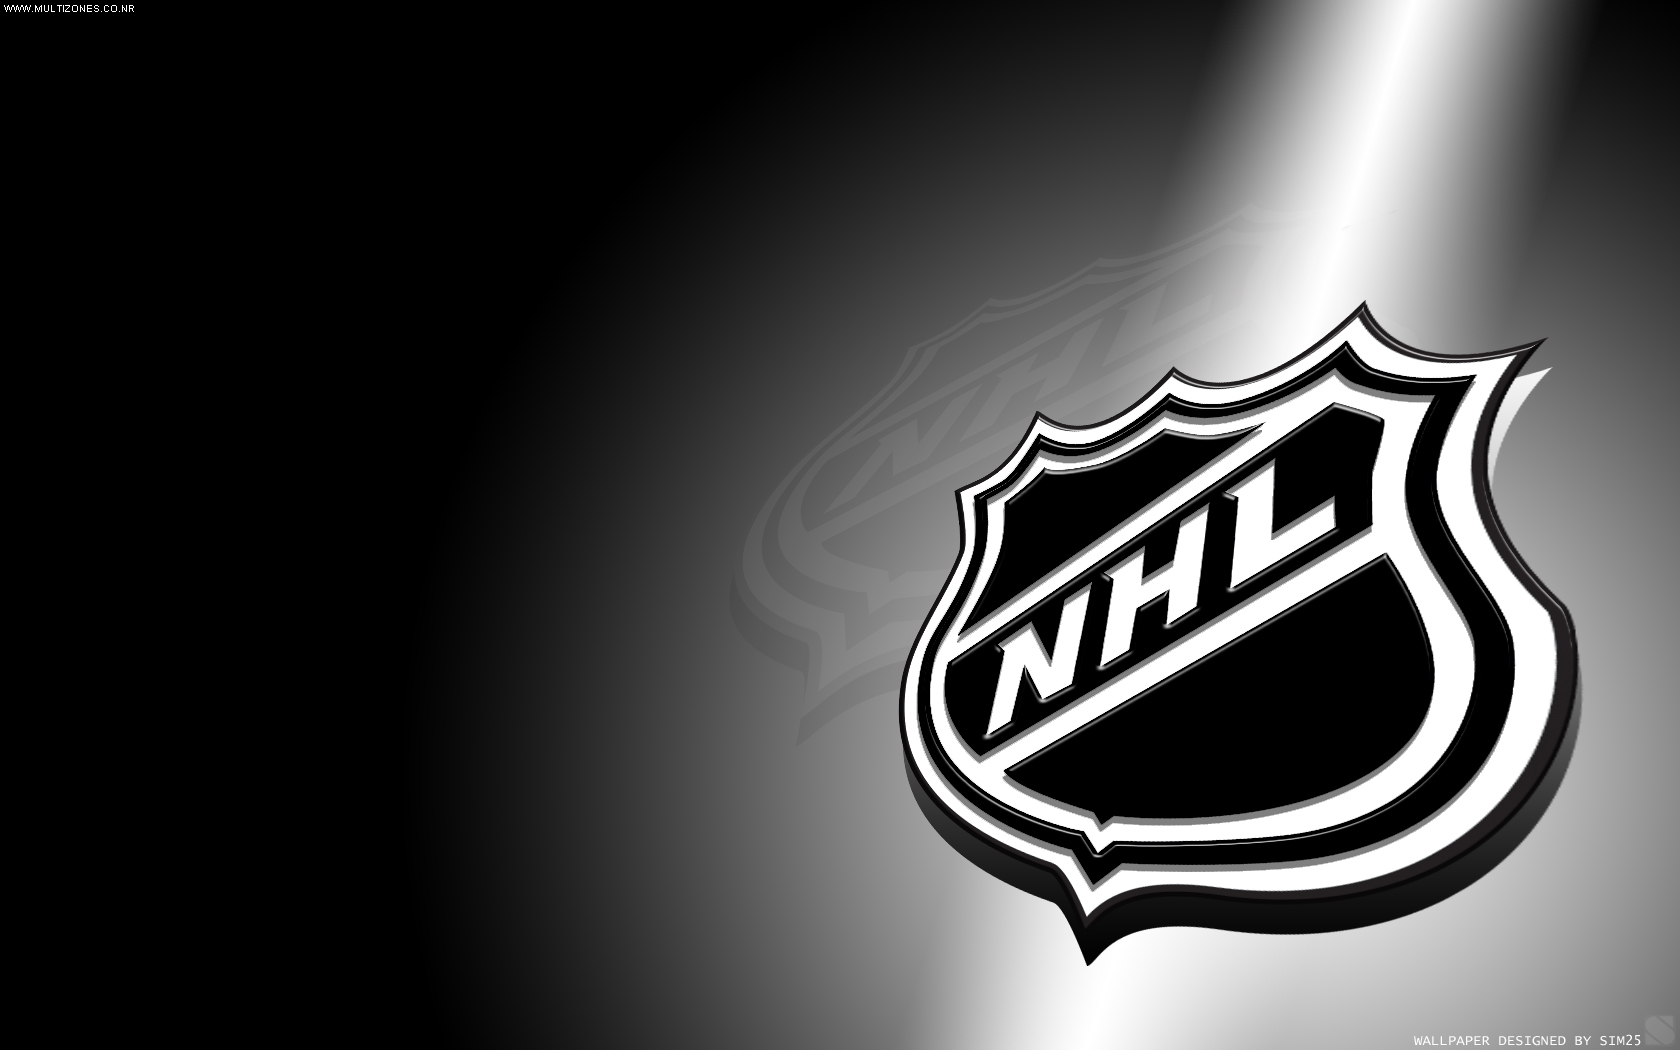  3d national hockey league nhl hd wallpapers free hd wallpapers logo 3